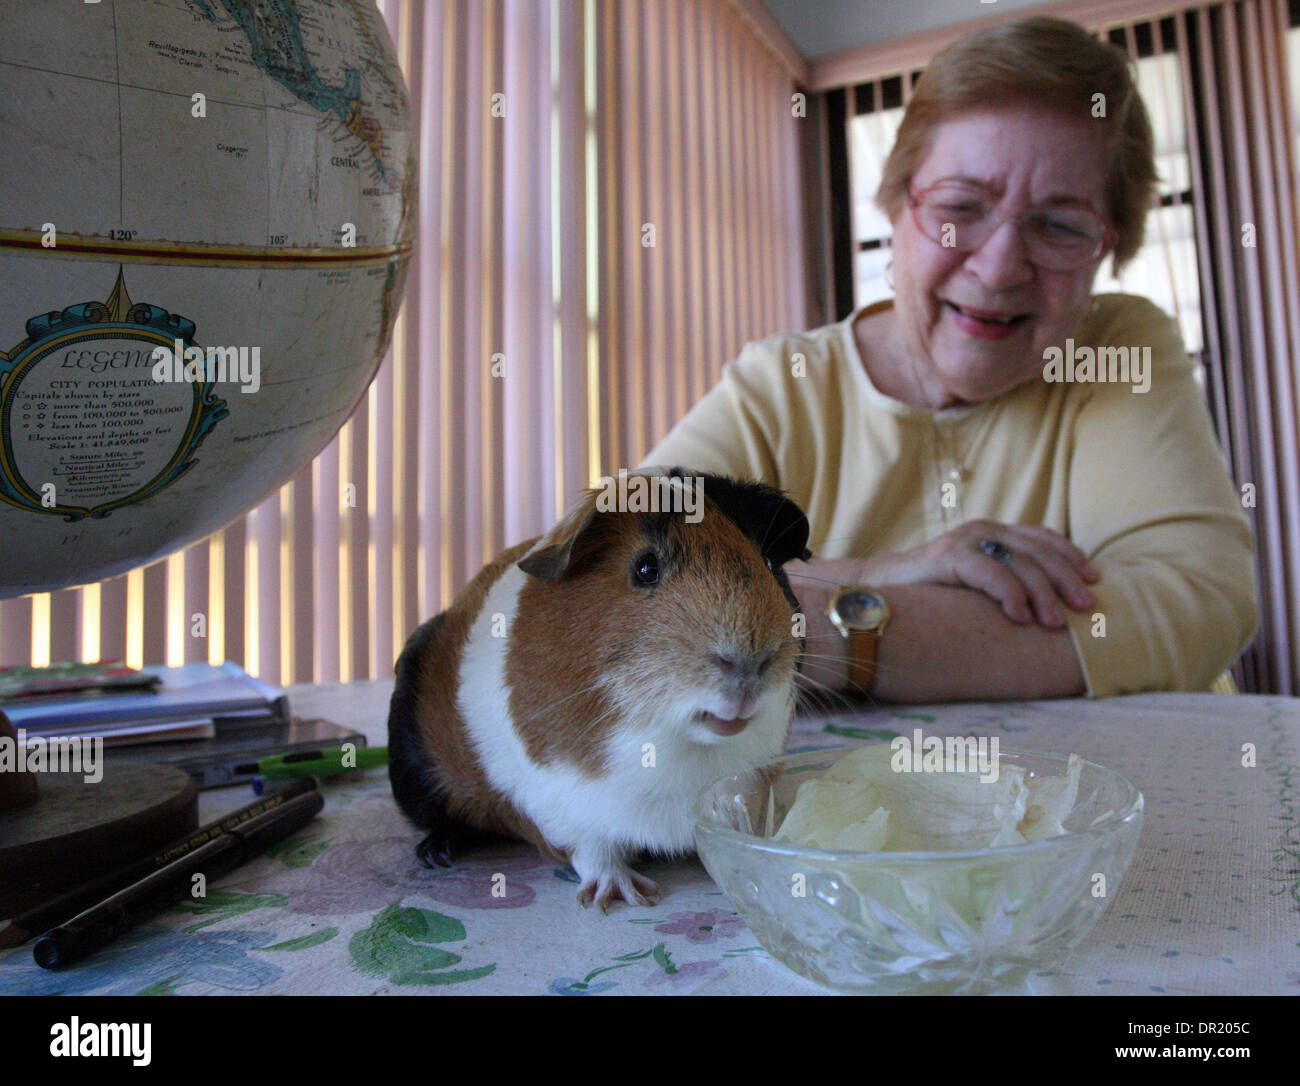 PT 301886 FITT guinea 2.BRENDAN FITTERER | Times.(02/17/2009 New Port Richey)  .Bess Ciarcia watches her guinea pig, Scotty, eat a bowl of lettuce in the sunroom of their New Port Richey home. The Ciarcias are snowbirds, and fear that an airline policy that prohibits them from taking Scotty on an airplane, will force the to give him away. He's become a member of their family, who s Stock Photo